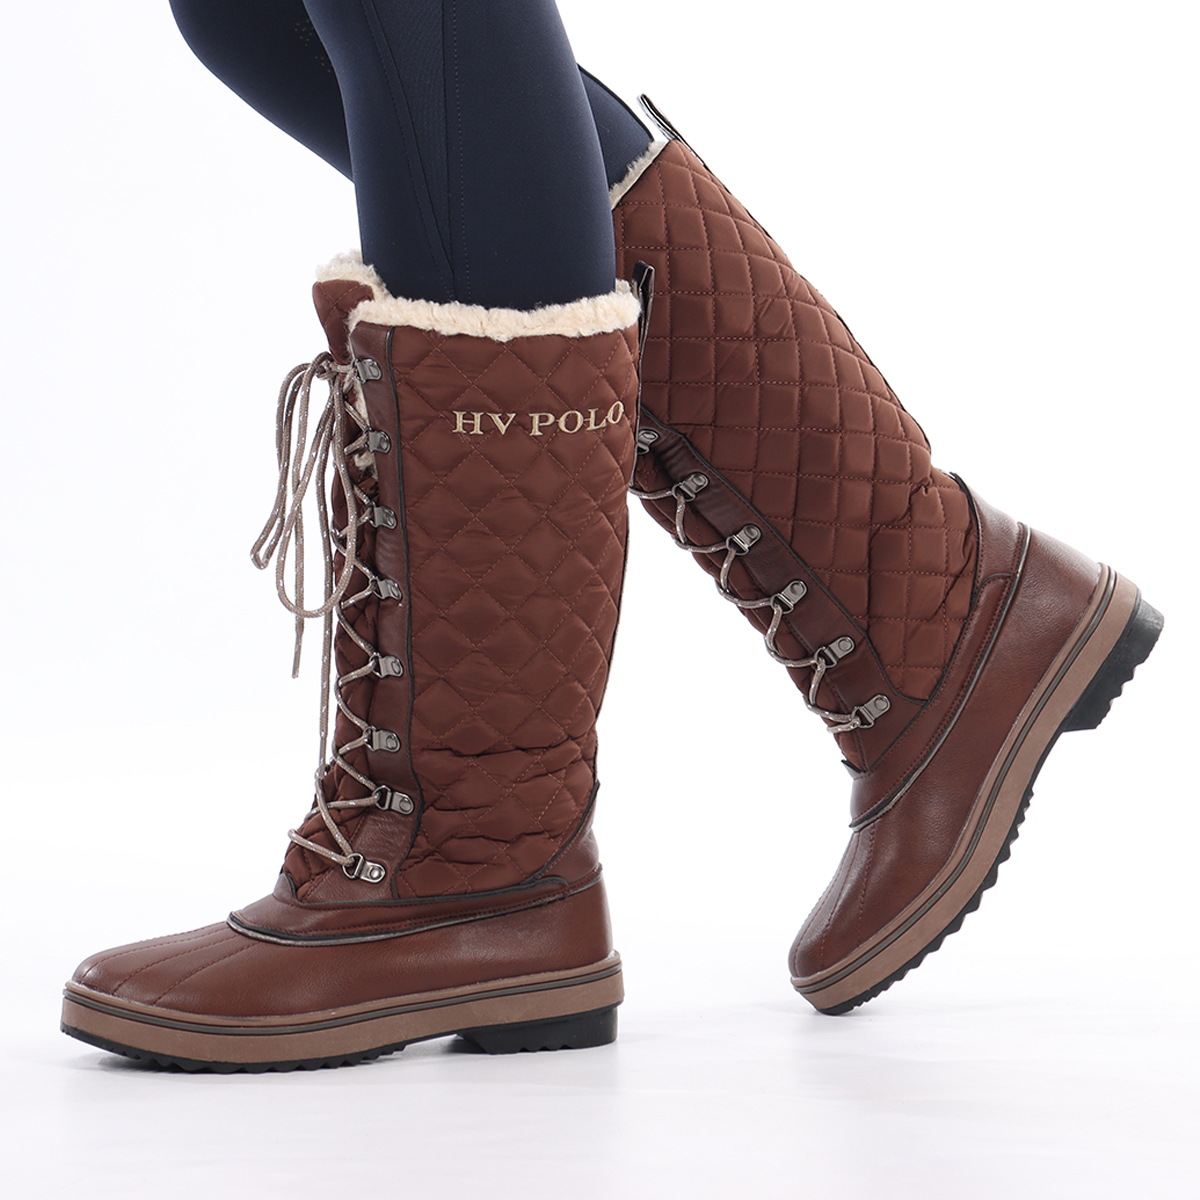 Thermoboots Hv Polo Hvpglaslynn Long, 39 in donkerbruin